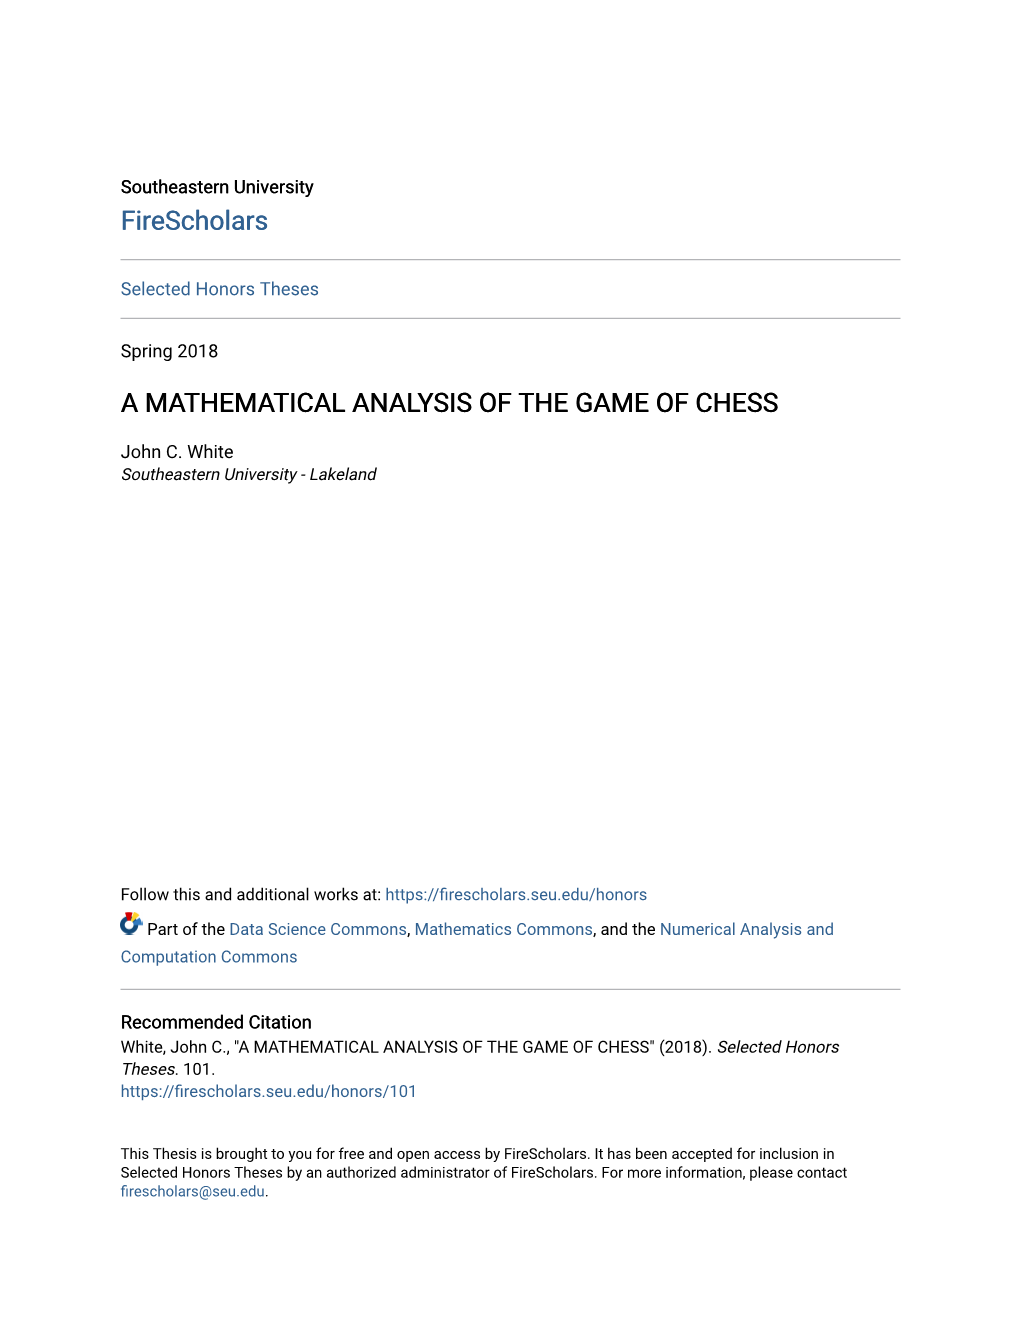 A Mathematical Analysis of the Game of Chess